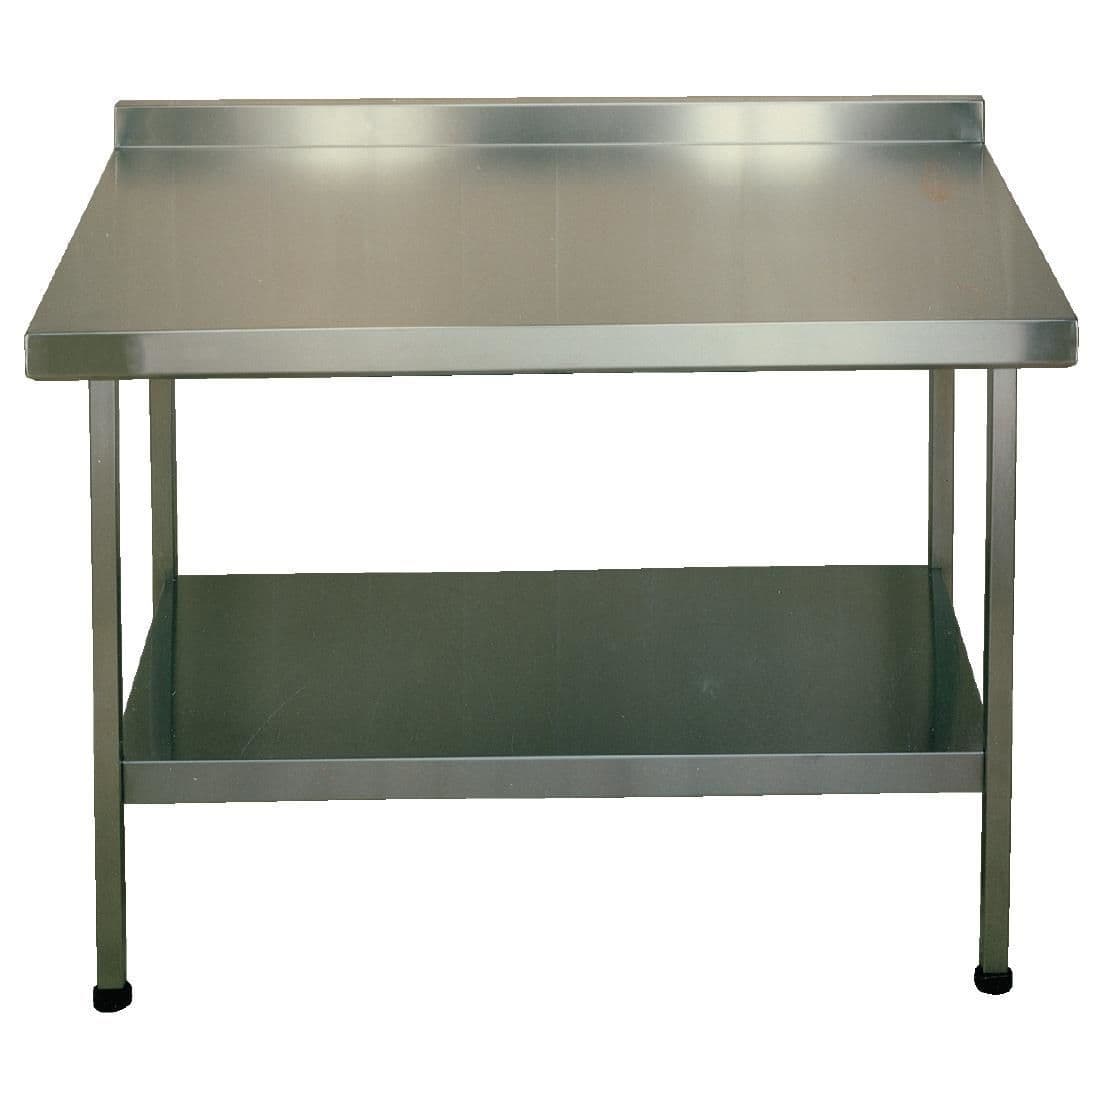 Franke Sissons Stainless Steel Wall Table with Upstand 900x600mm JD Catering Equipment Solutions Ltd